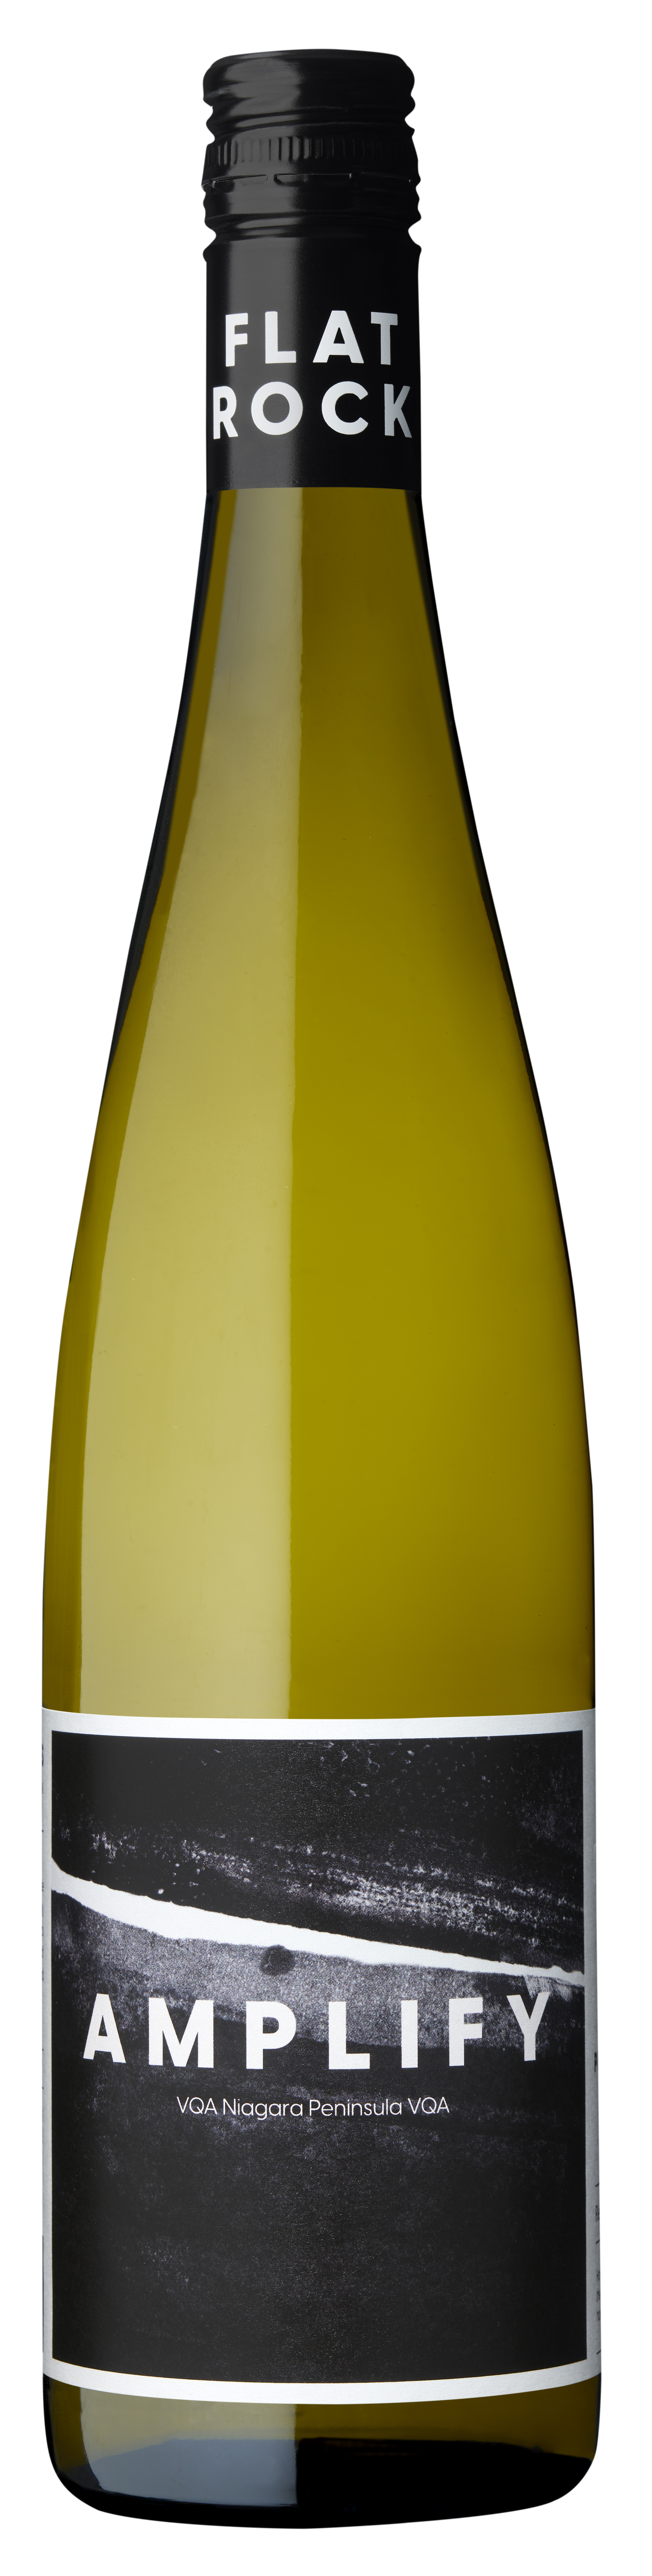 Product Image for 2020 Amplify Riesling